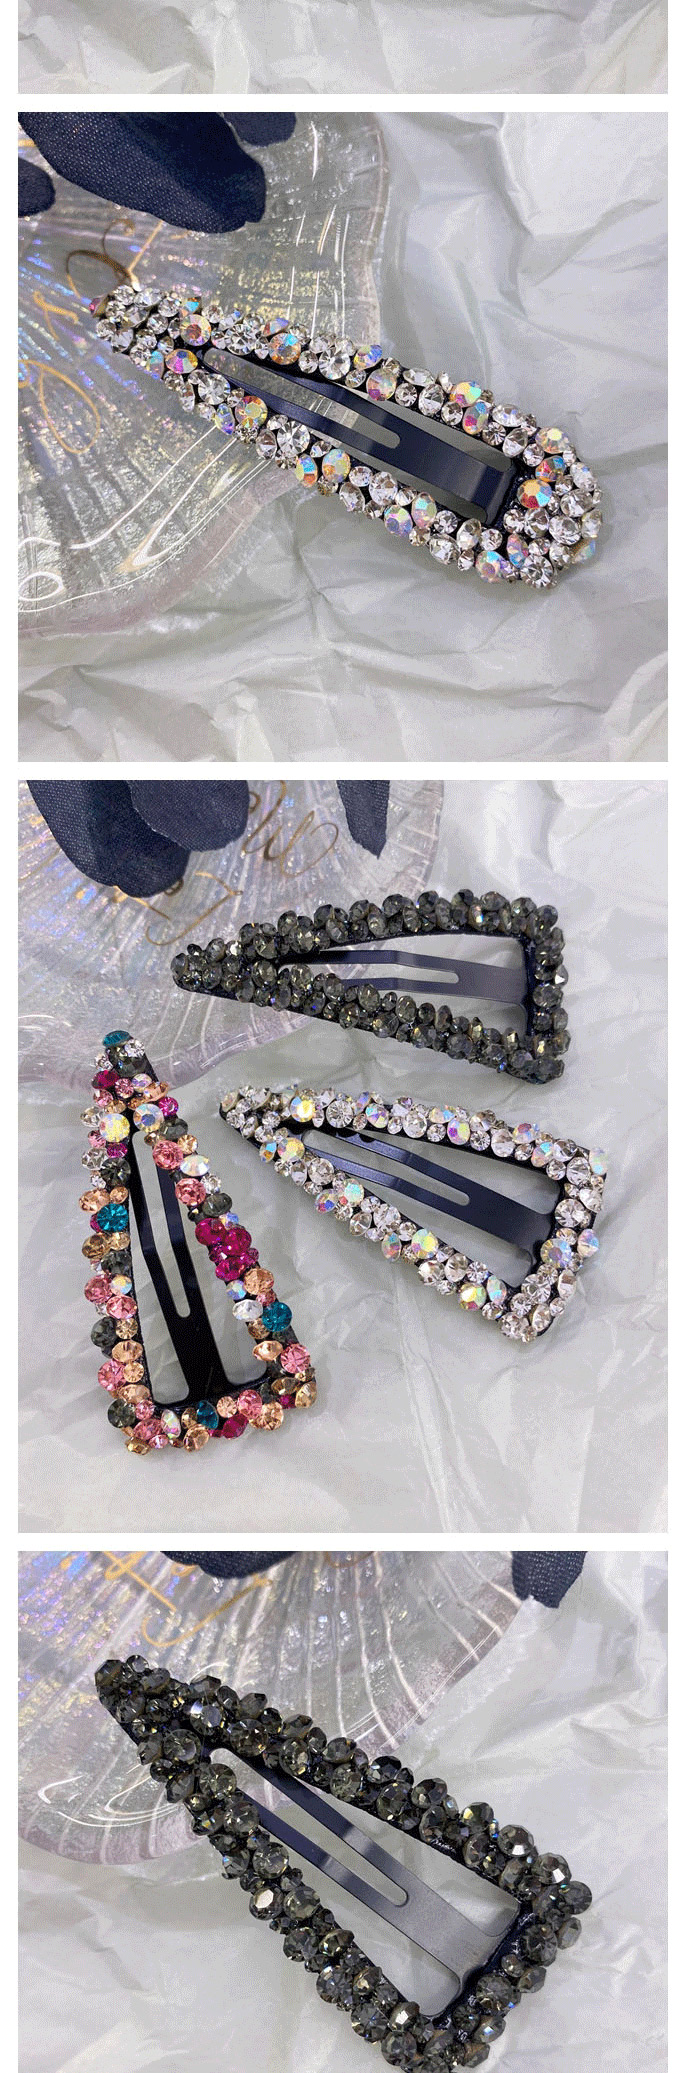 Fashion Rectangular Color Diamond-shaped Seamless Crystal Hollow Water Drop Square Triangle Hairpin,Hairpins